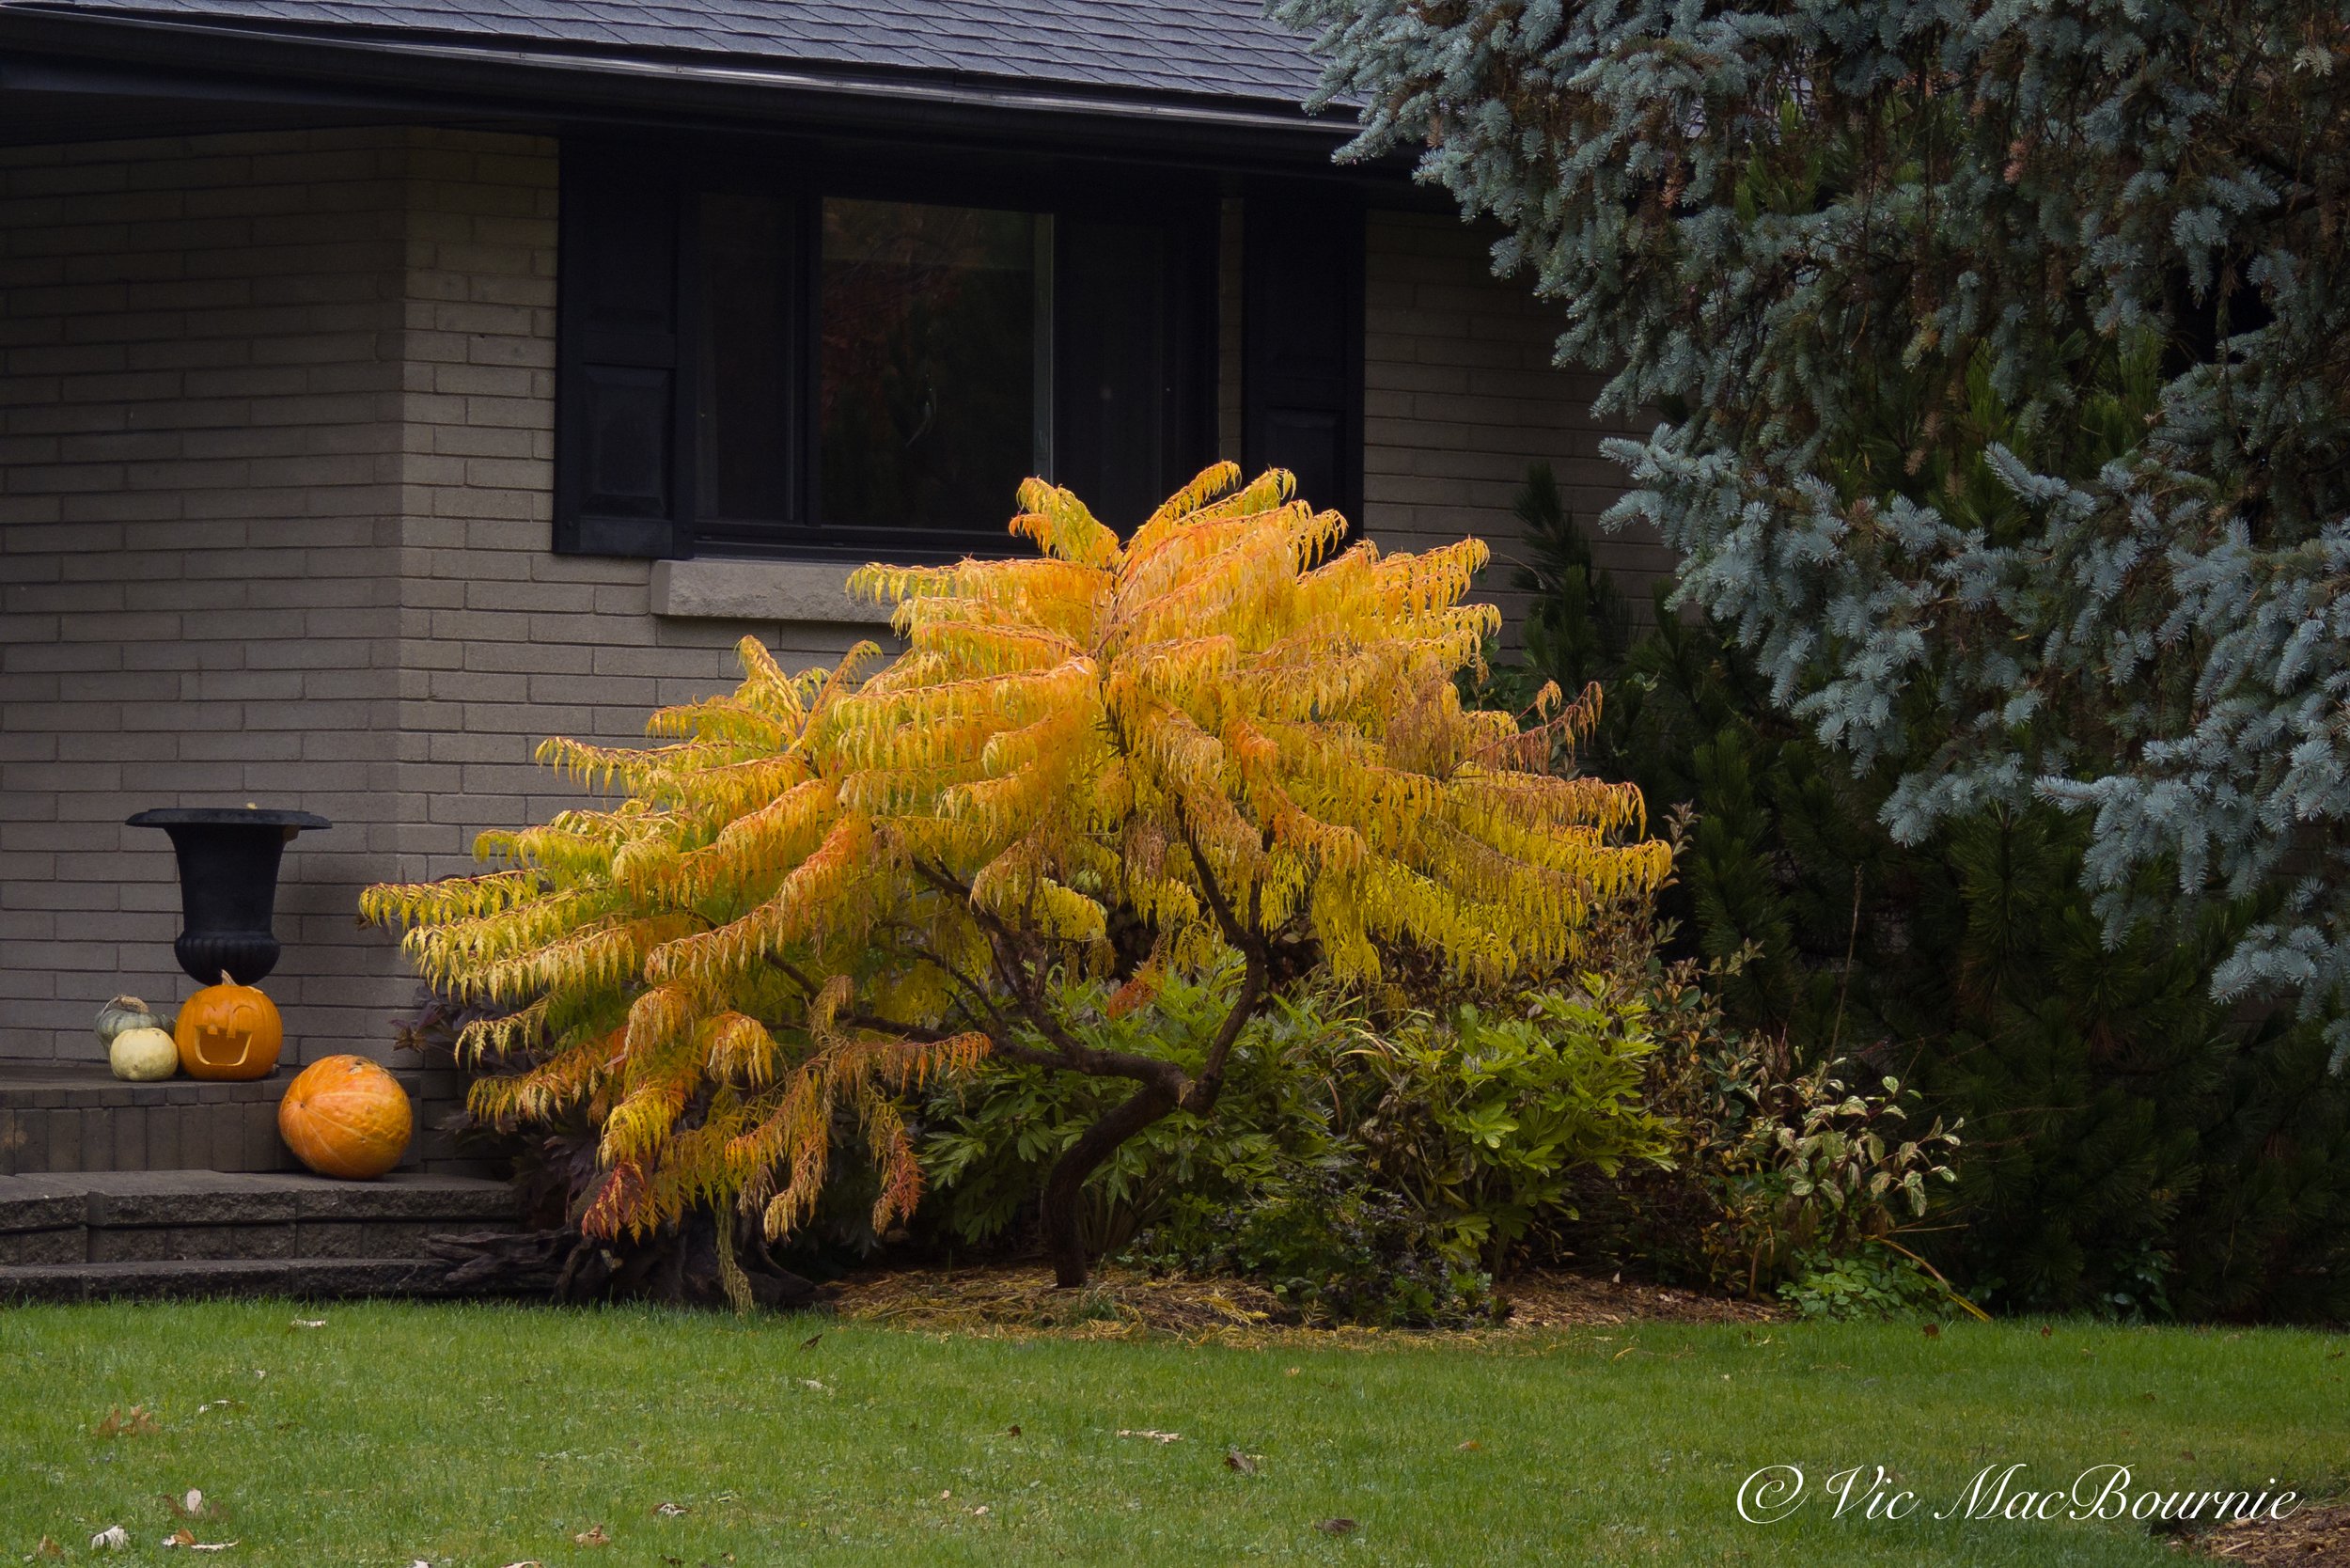 This small sumac is an excellent small tree that has the look of a Japanese Maple.